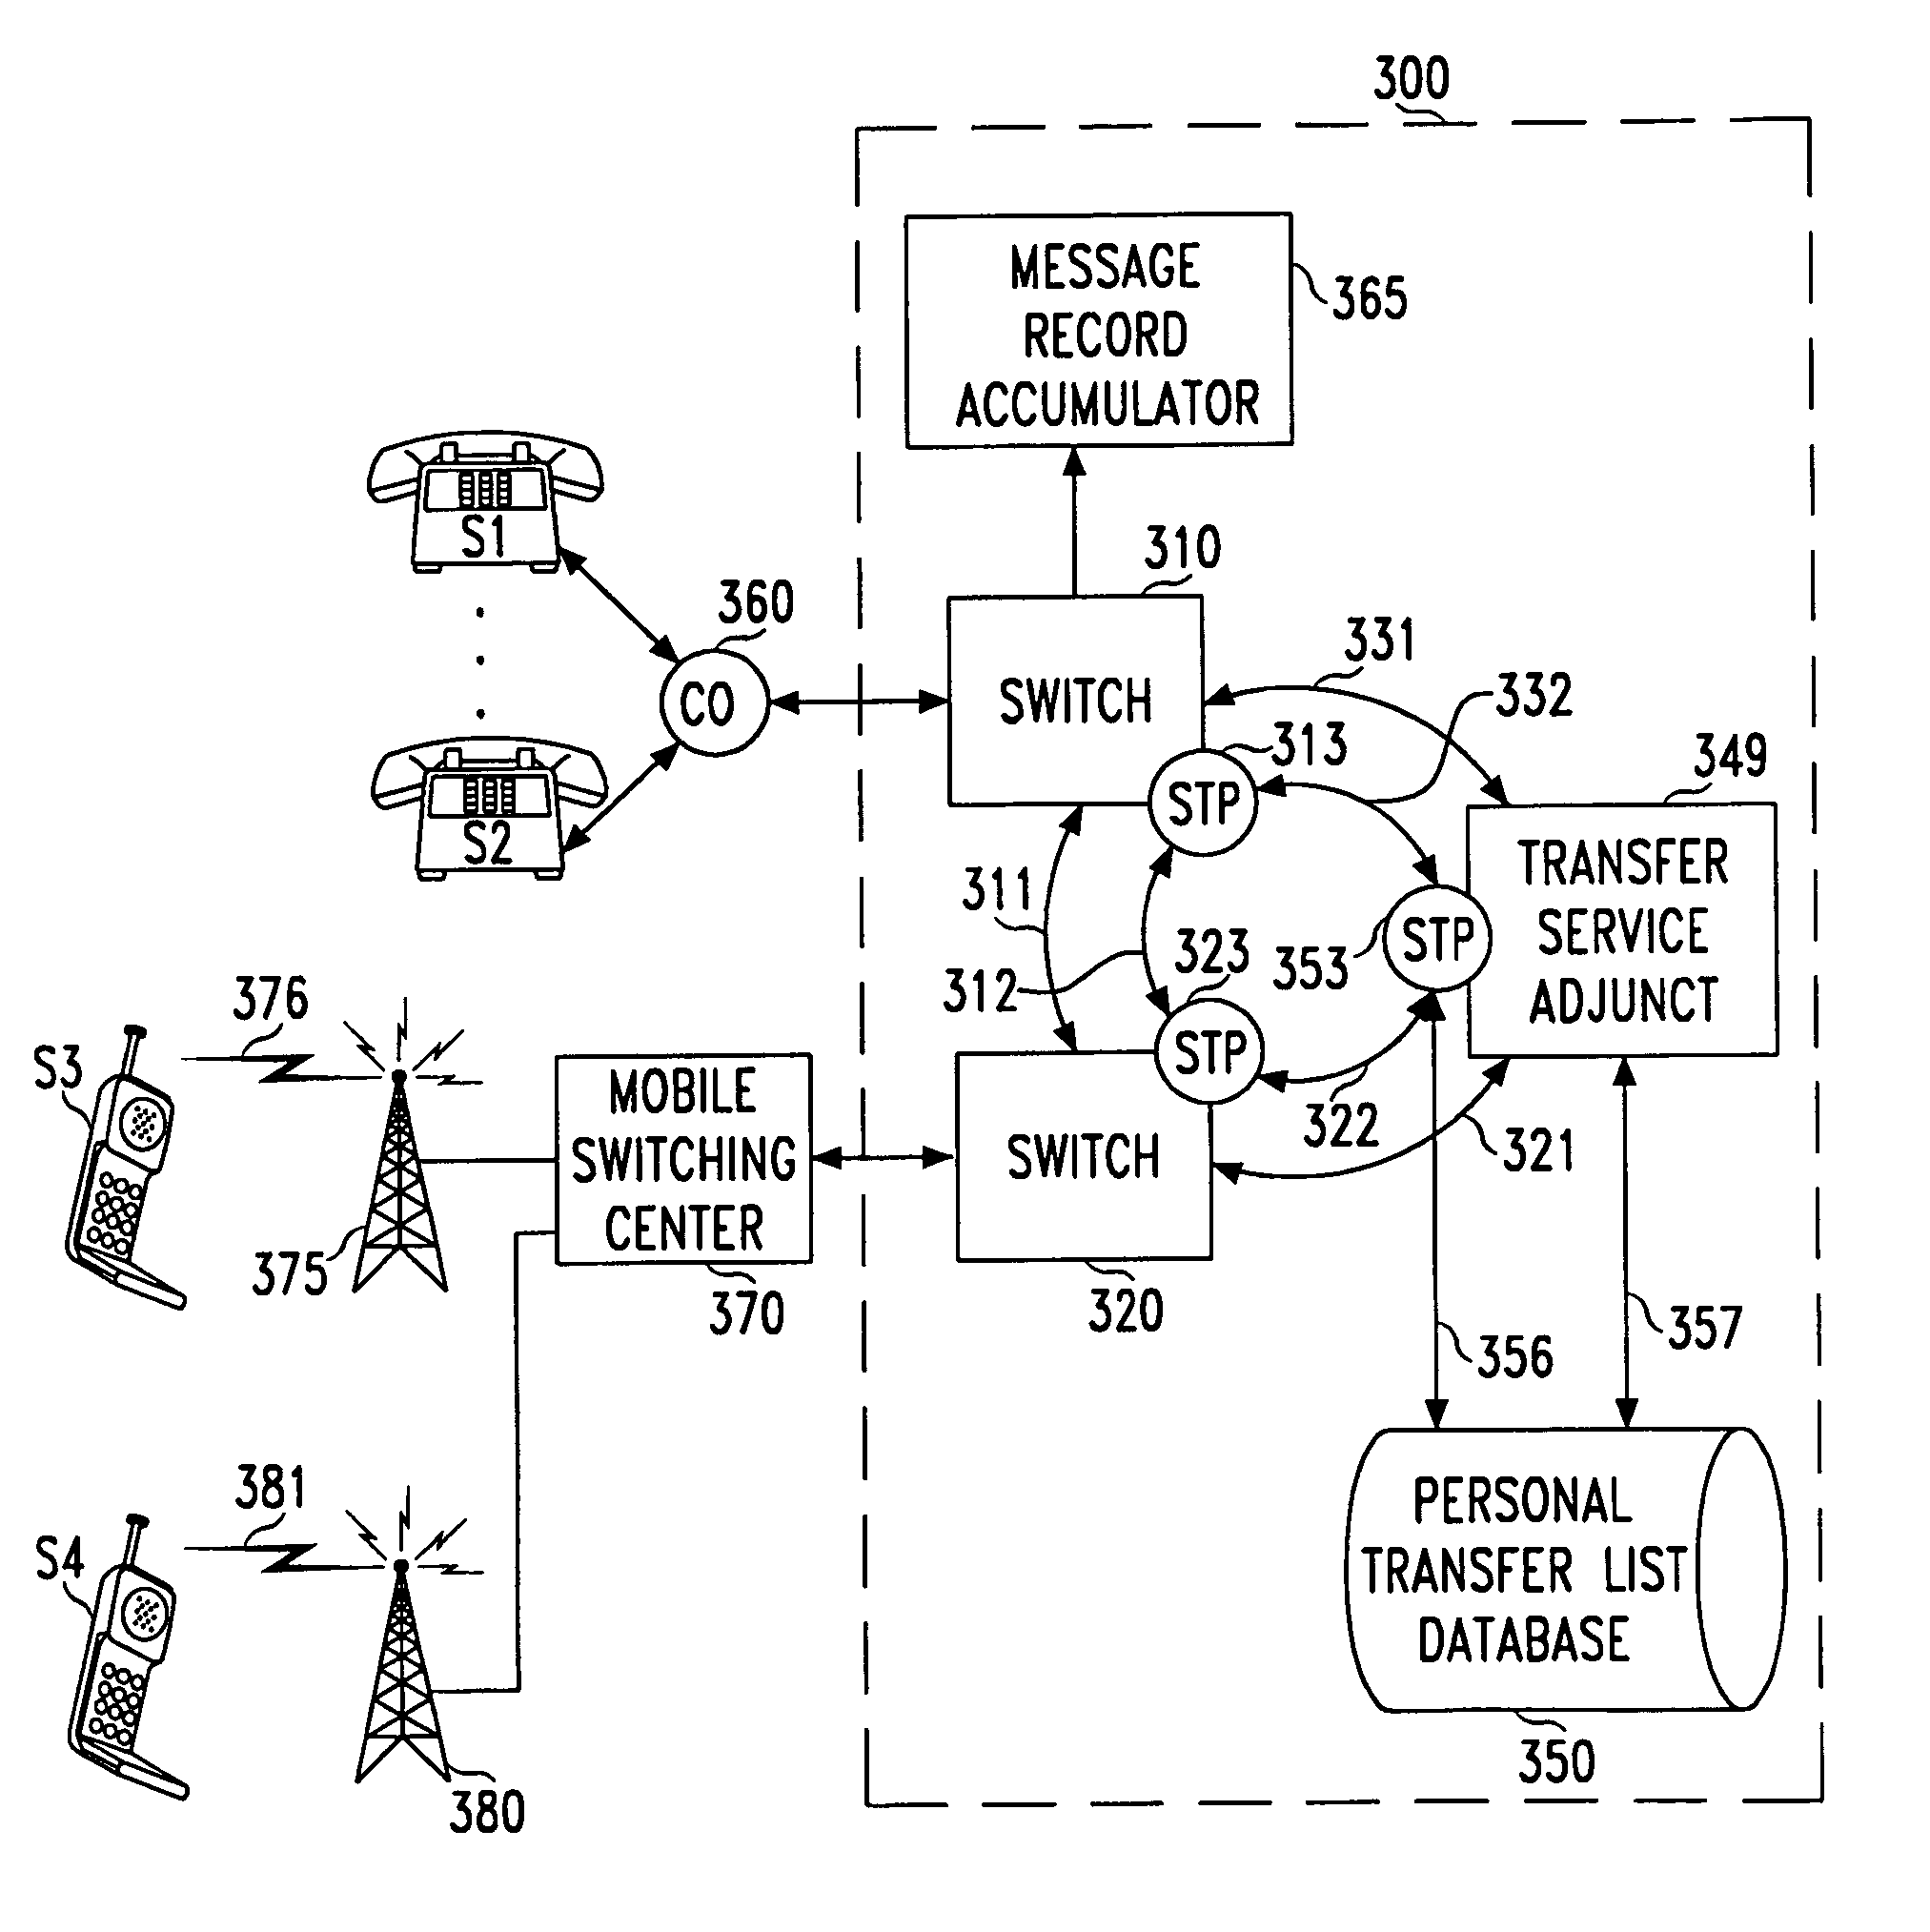 Method and apparatus for in-progress call forwarding